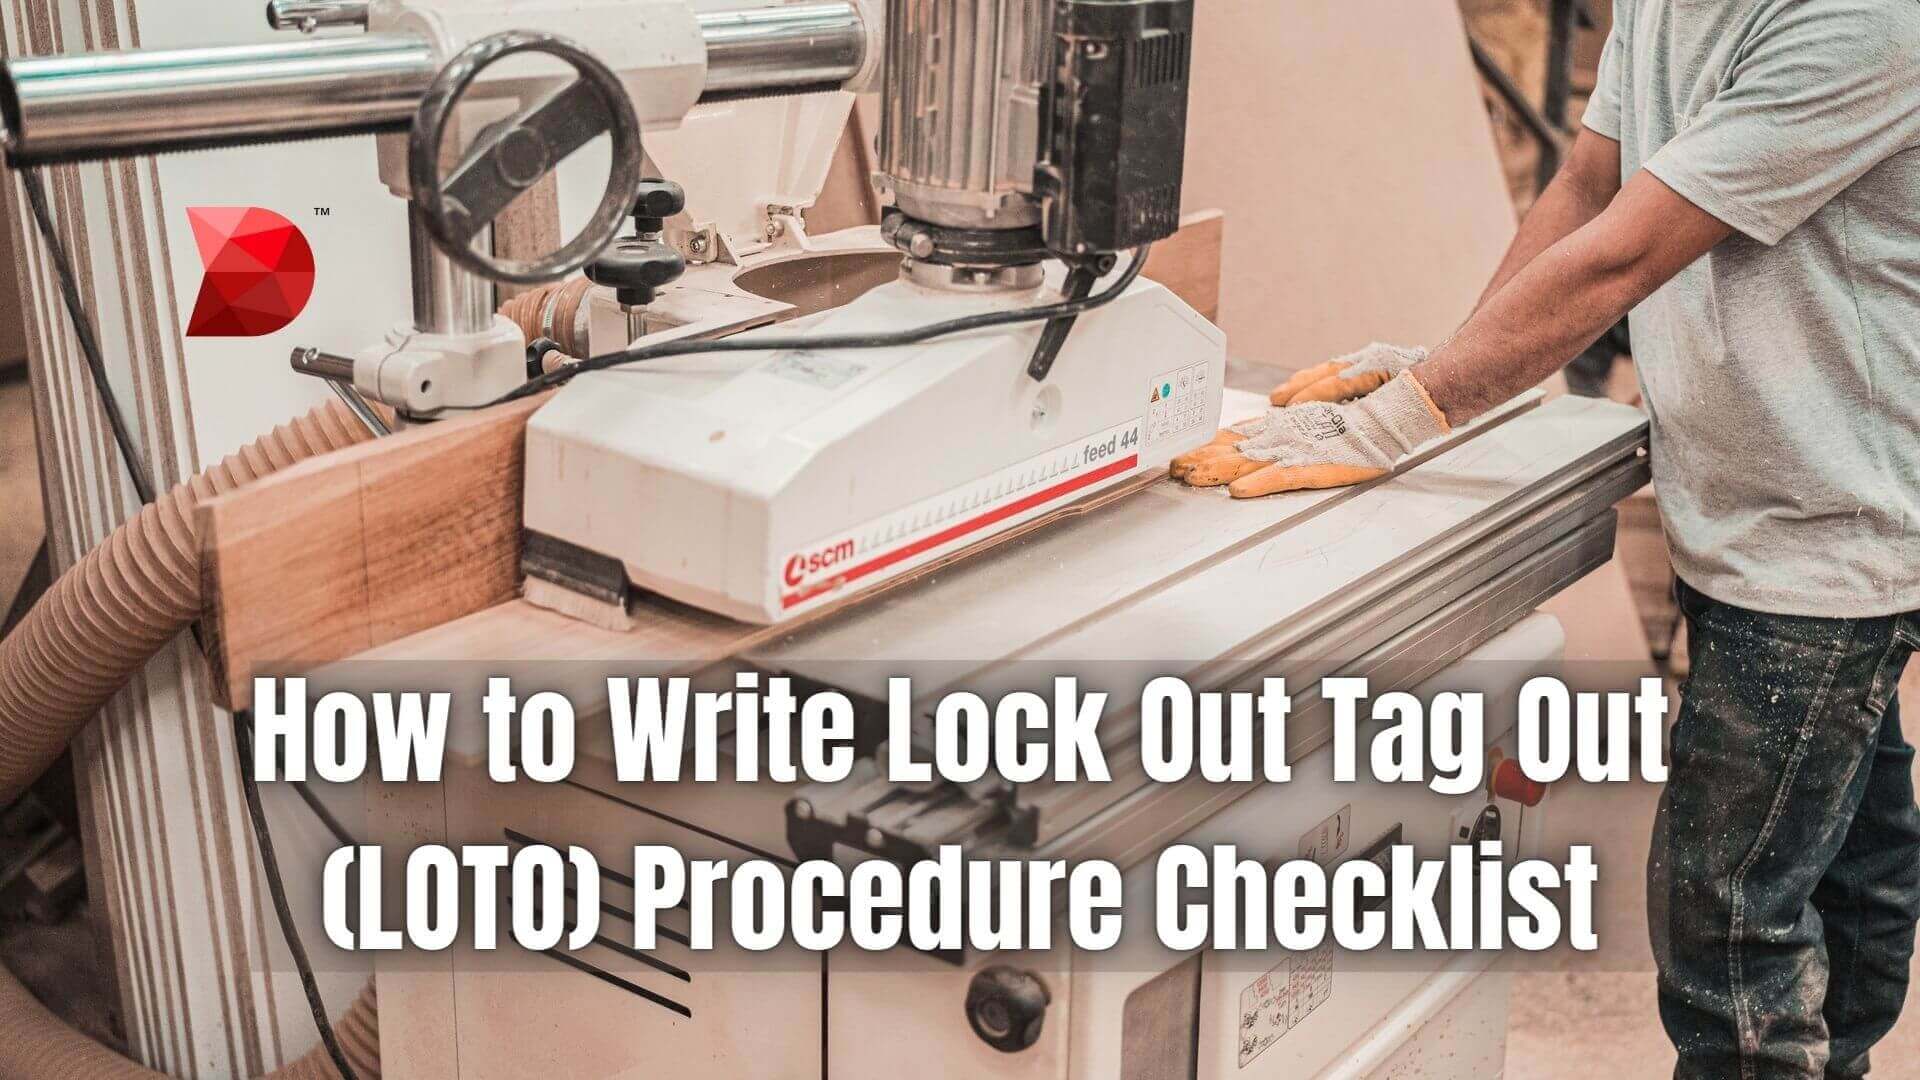 How to Write Lock Out Tag Out (LOTO) Procedure Checklist